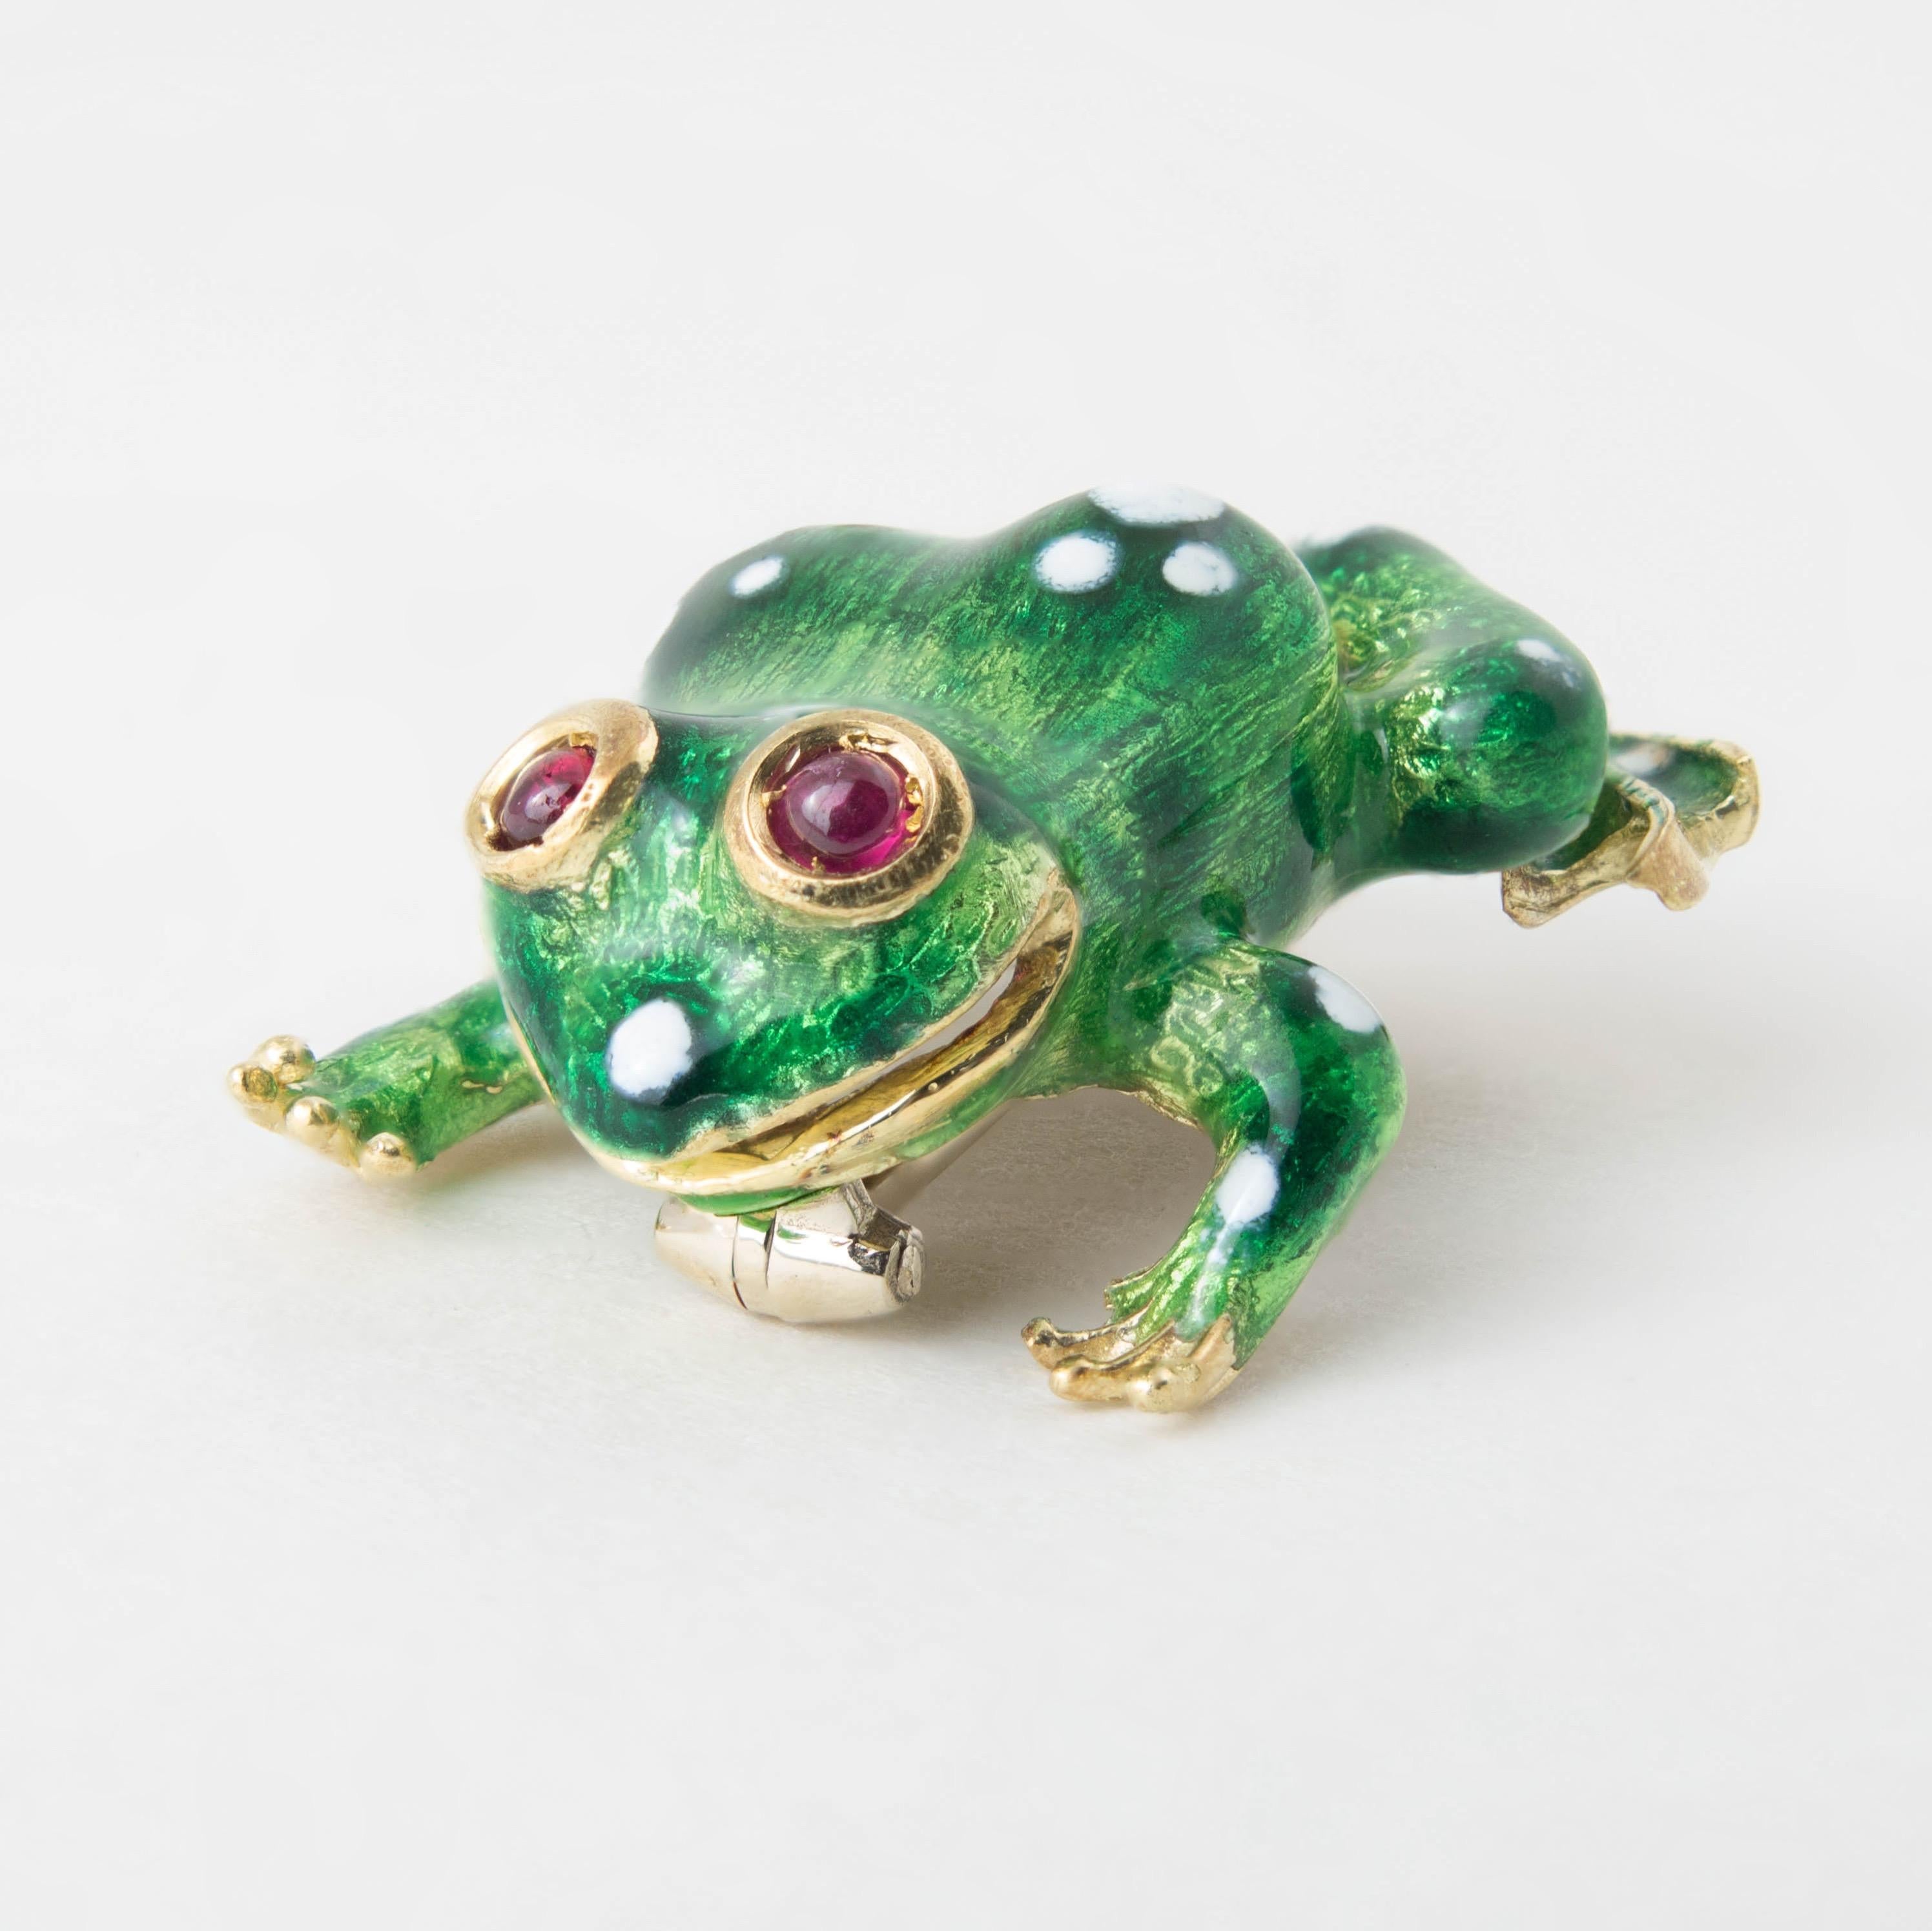 Contemporary Frog Pin or Brooch, 18k Gold, Green and White Enamel, Ruby Eyes